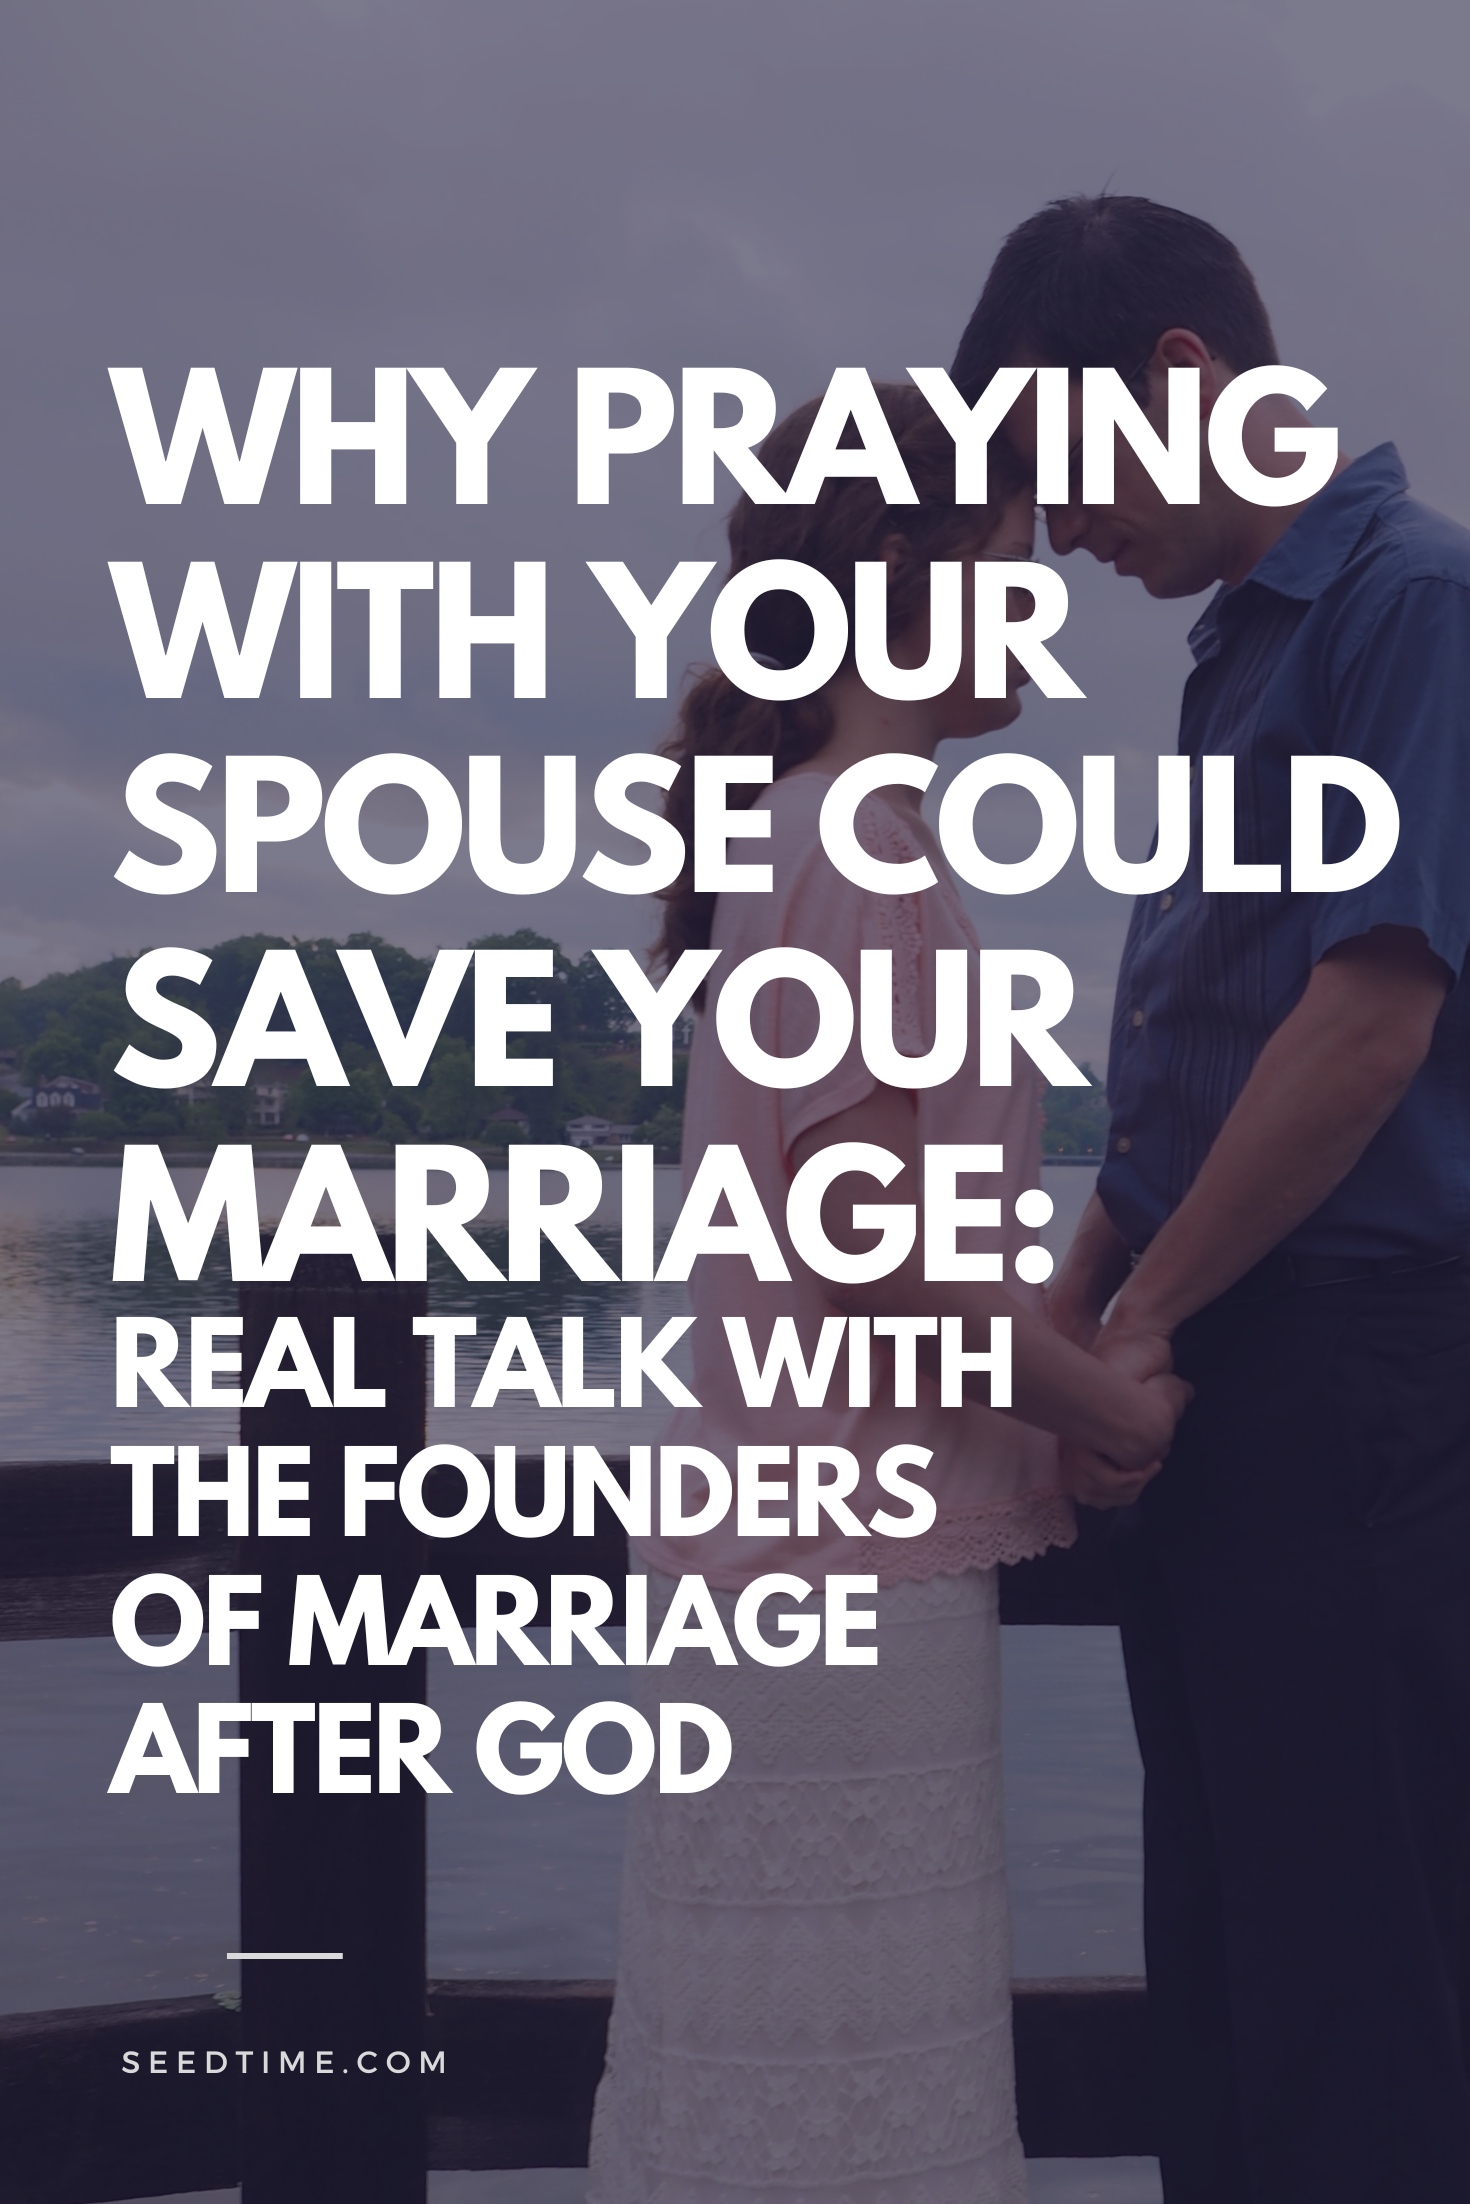 praying with your spouse could save your marriage - from Marriage after God podcast